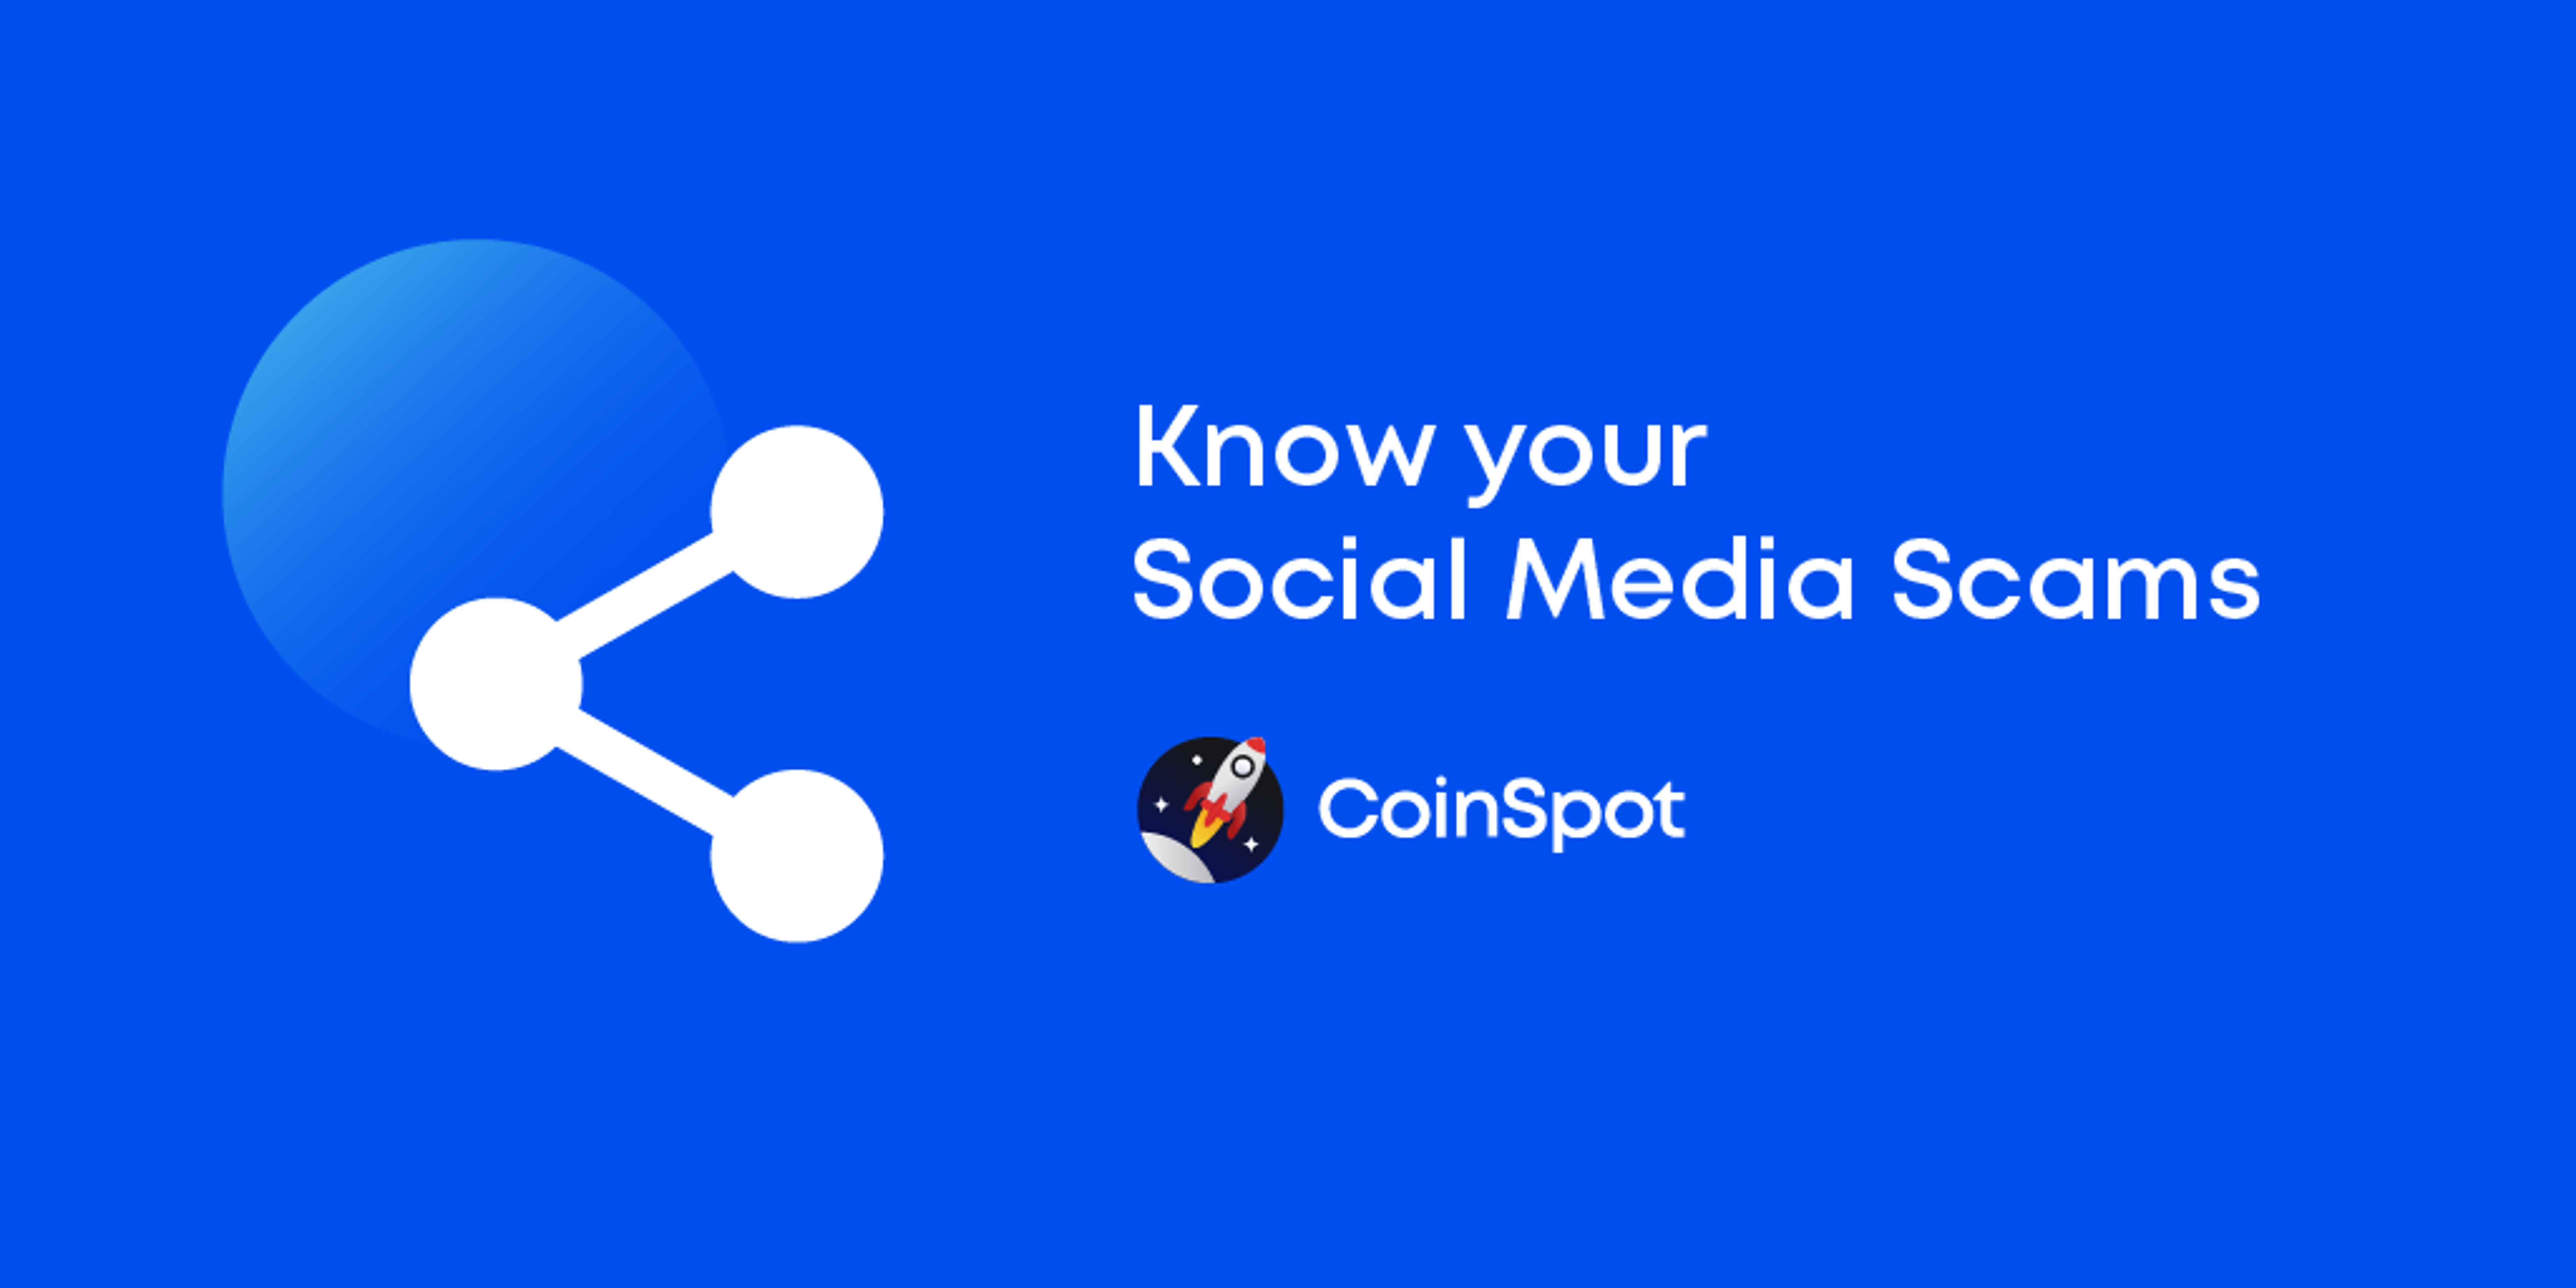 CoinSpot_-_Know_your_Social_Media_Scams.png